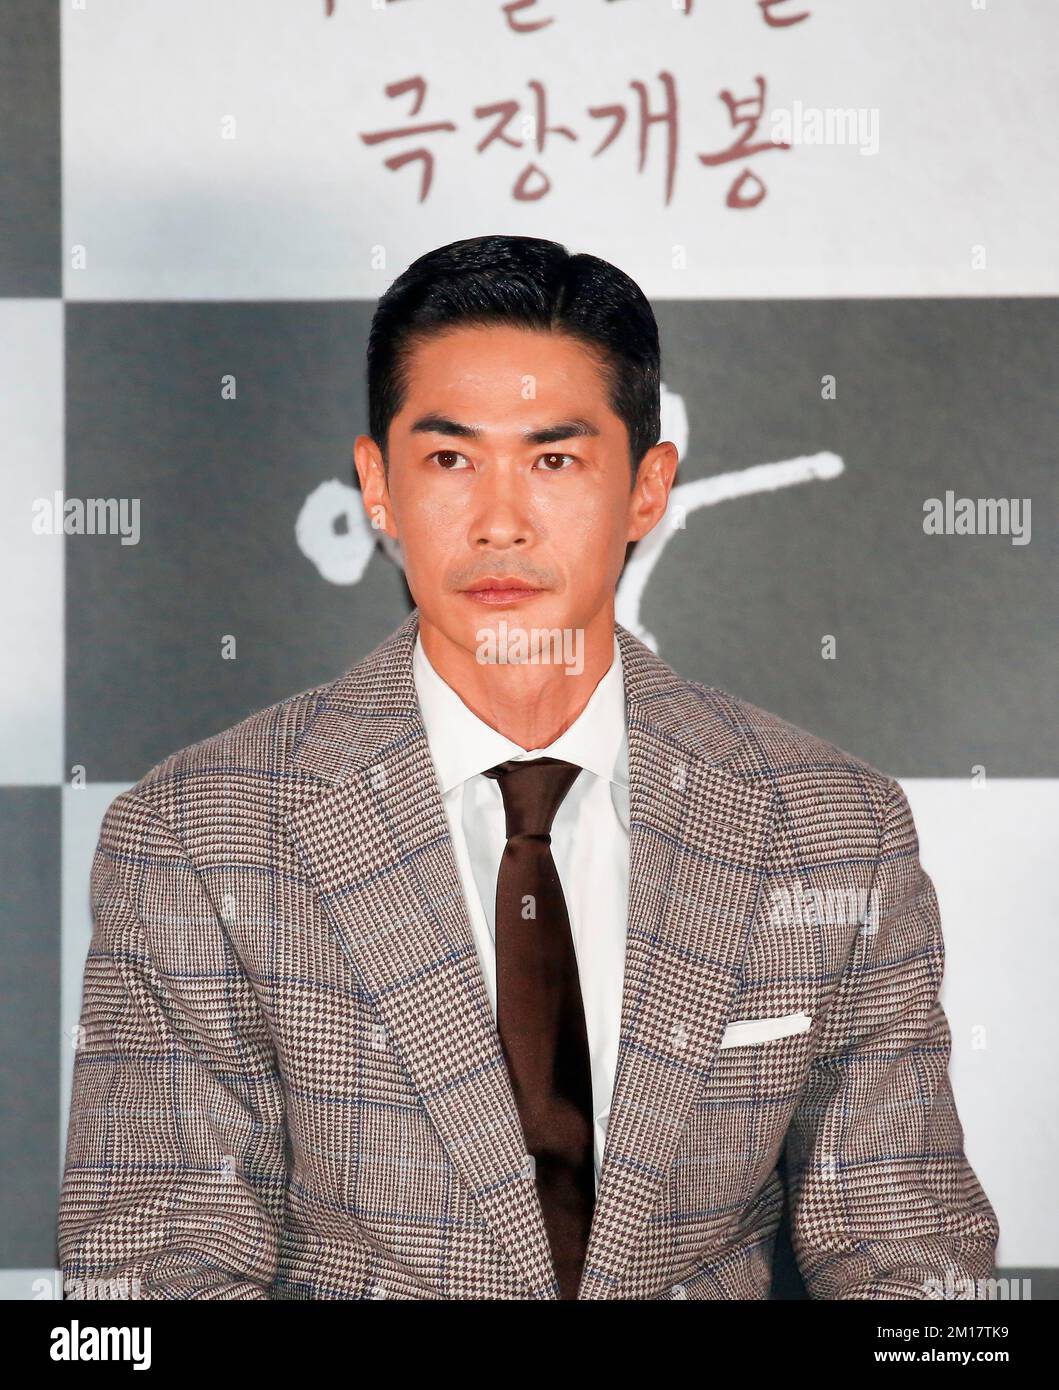 Bae Jung-Nam, Dec 8, 2022 : South Korean actor Bae Jung-Nam attends a press conference after a press preview of the movie 'Hero' in Seoul, South Korea. The upcoming South Korean musical drama film is about Korean independence fighter Ahn Jung-Geun (1879-1910) who assassinated on October 26, 1909, Ito Hirobumi, Japan's first prime minister and resident-general of Korea at Harbin station in northern China. Ahn was executed at the age of 31 in March 1910. Japan colonised Korea from 1910 to 1945. Credit: Lee Jae-Won/AFLO/Alamy Live News Stock Photo